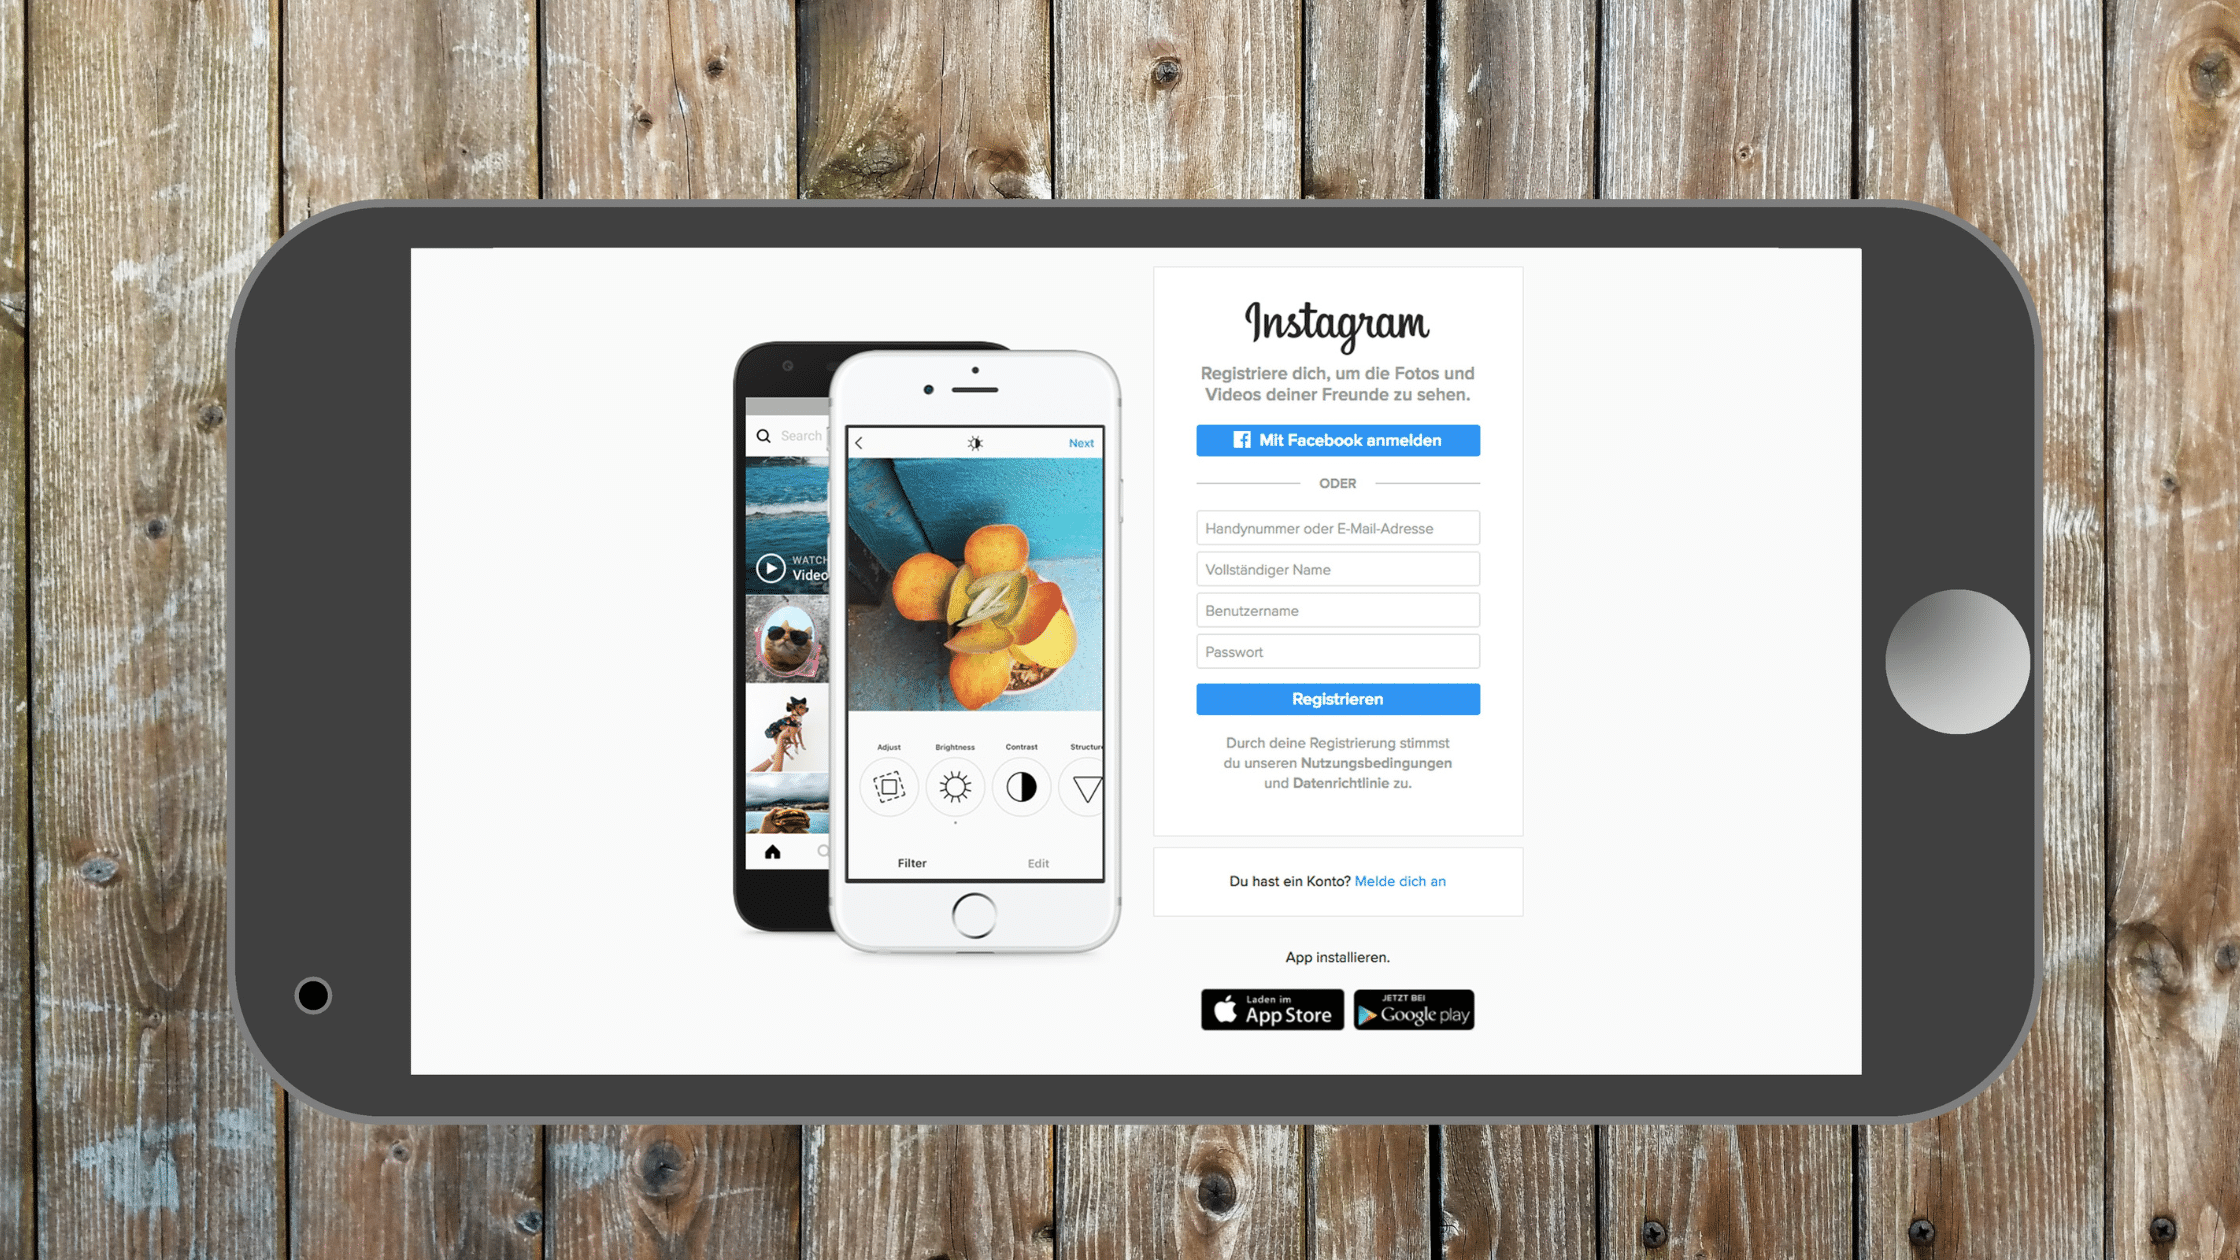 Learn how to use instagram for companies